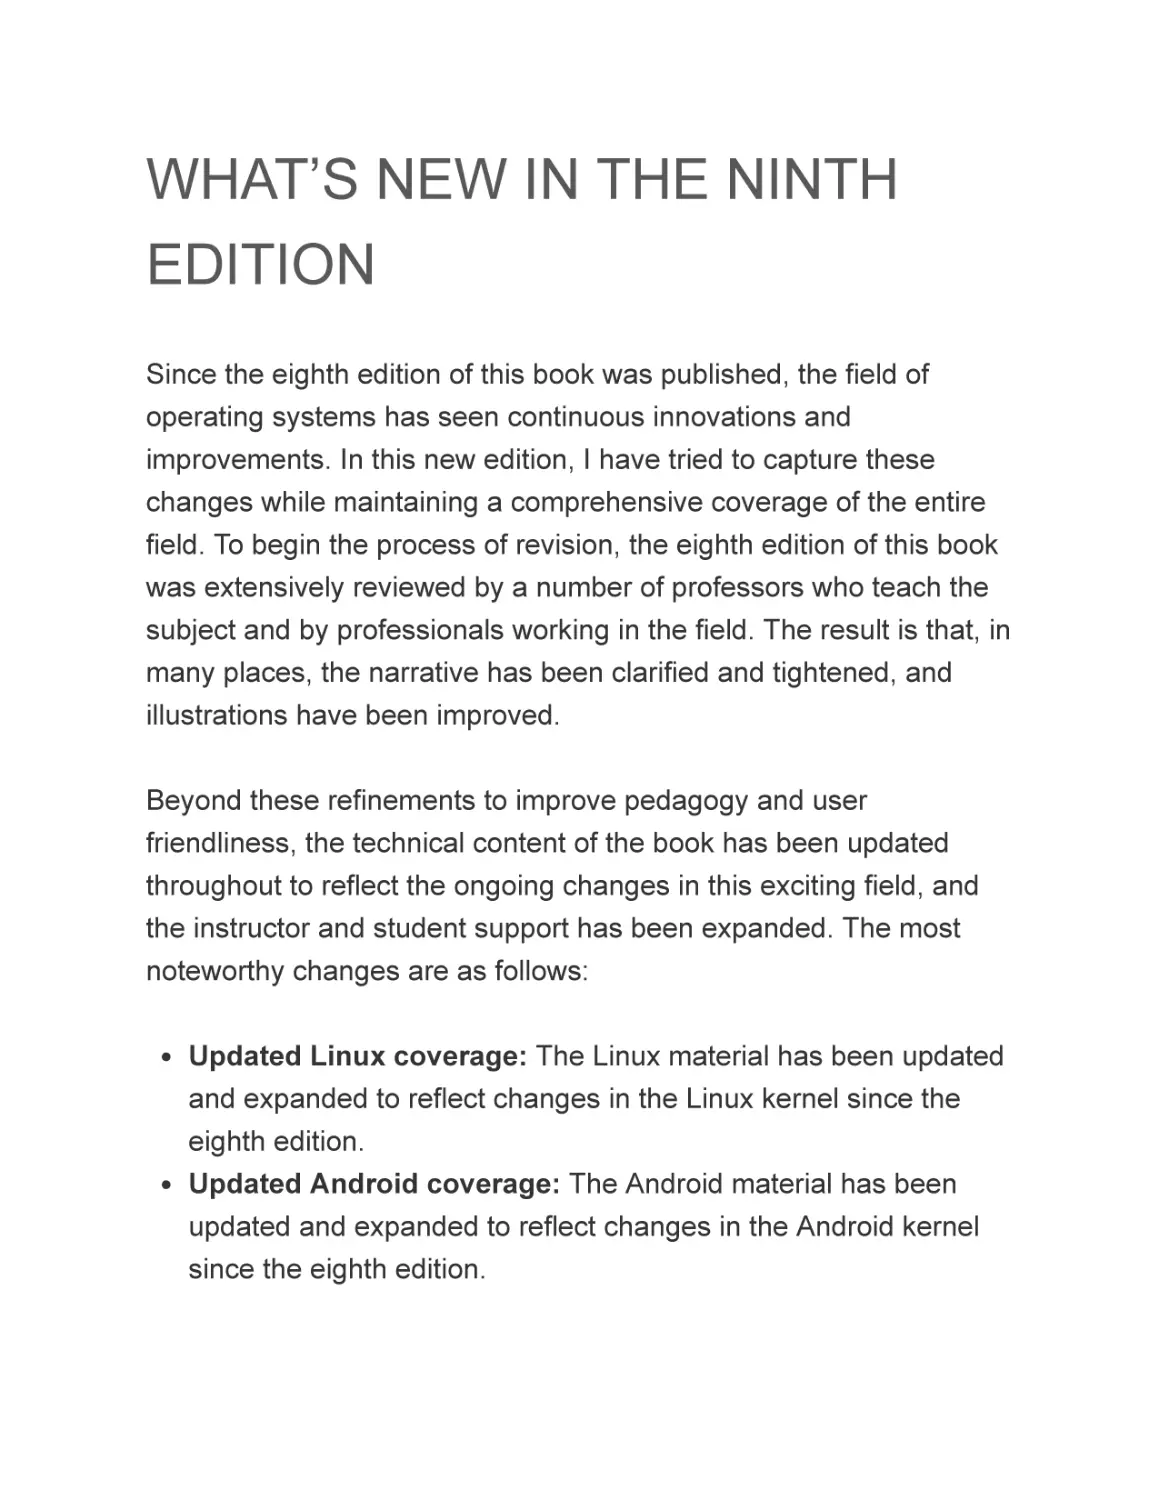 WHAT’S NEW IN THE NINTH EDITION